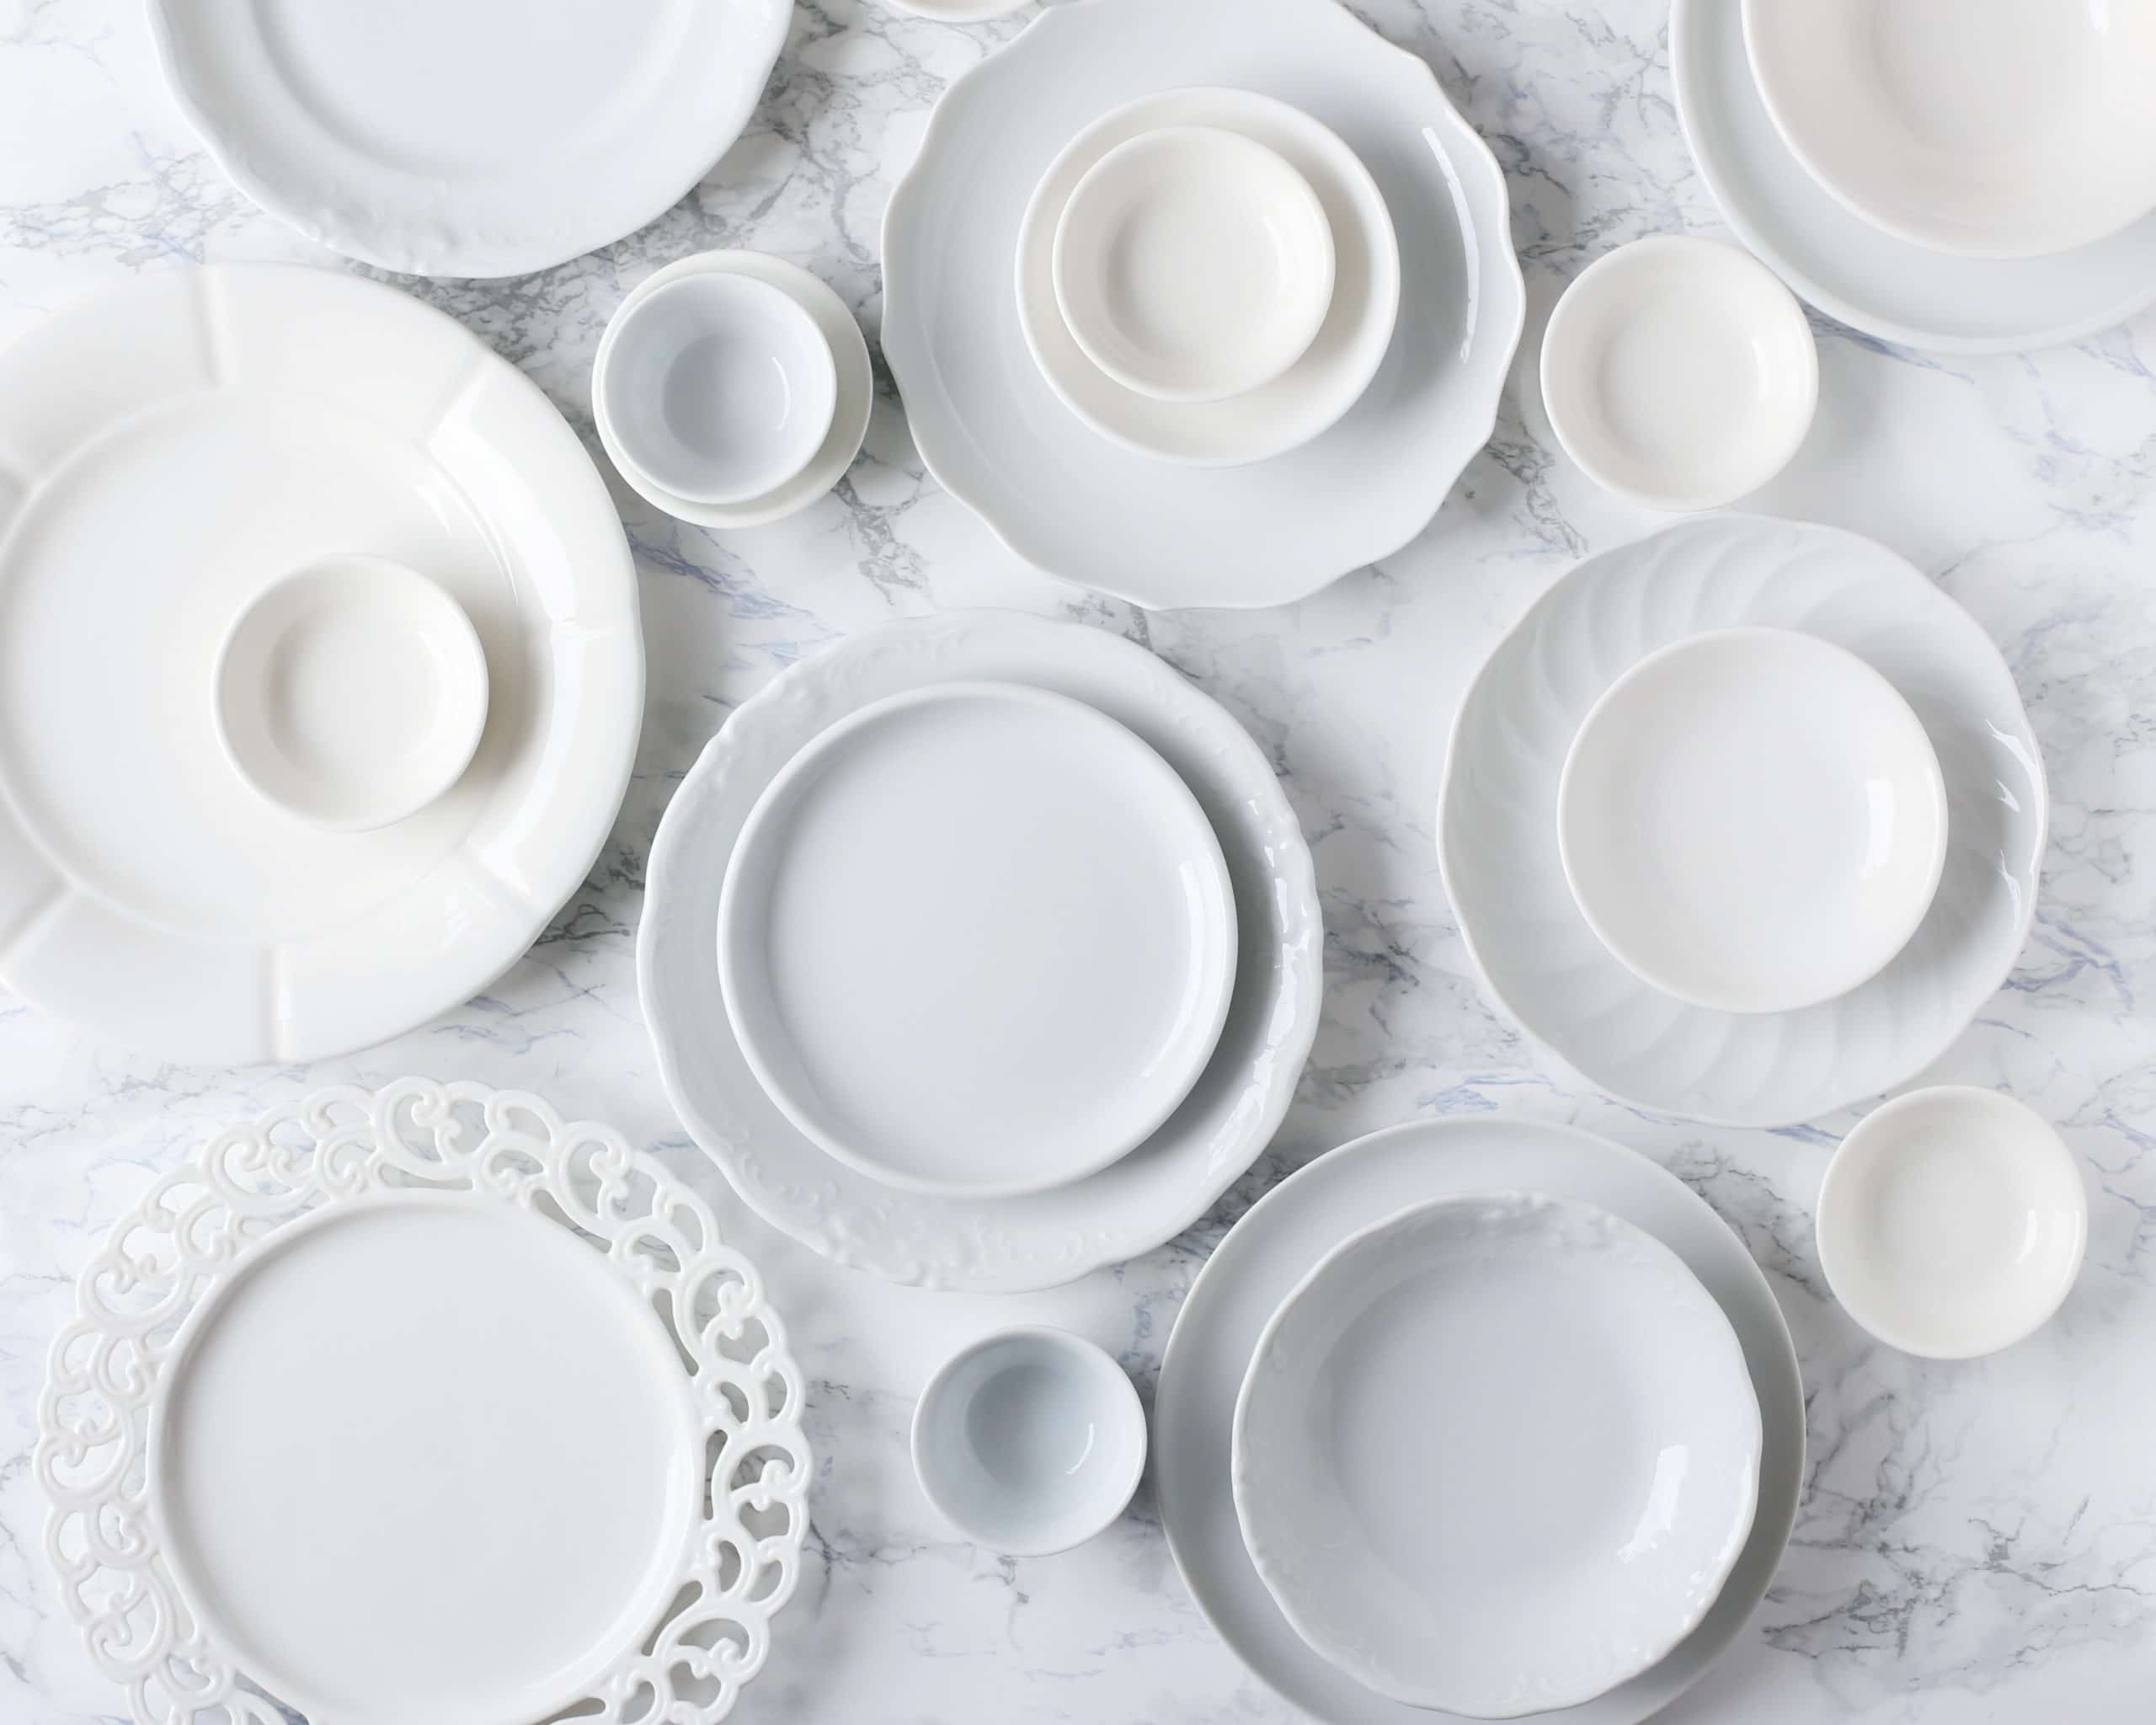 3 Considerations for Wedding Plate Rental